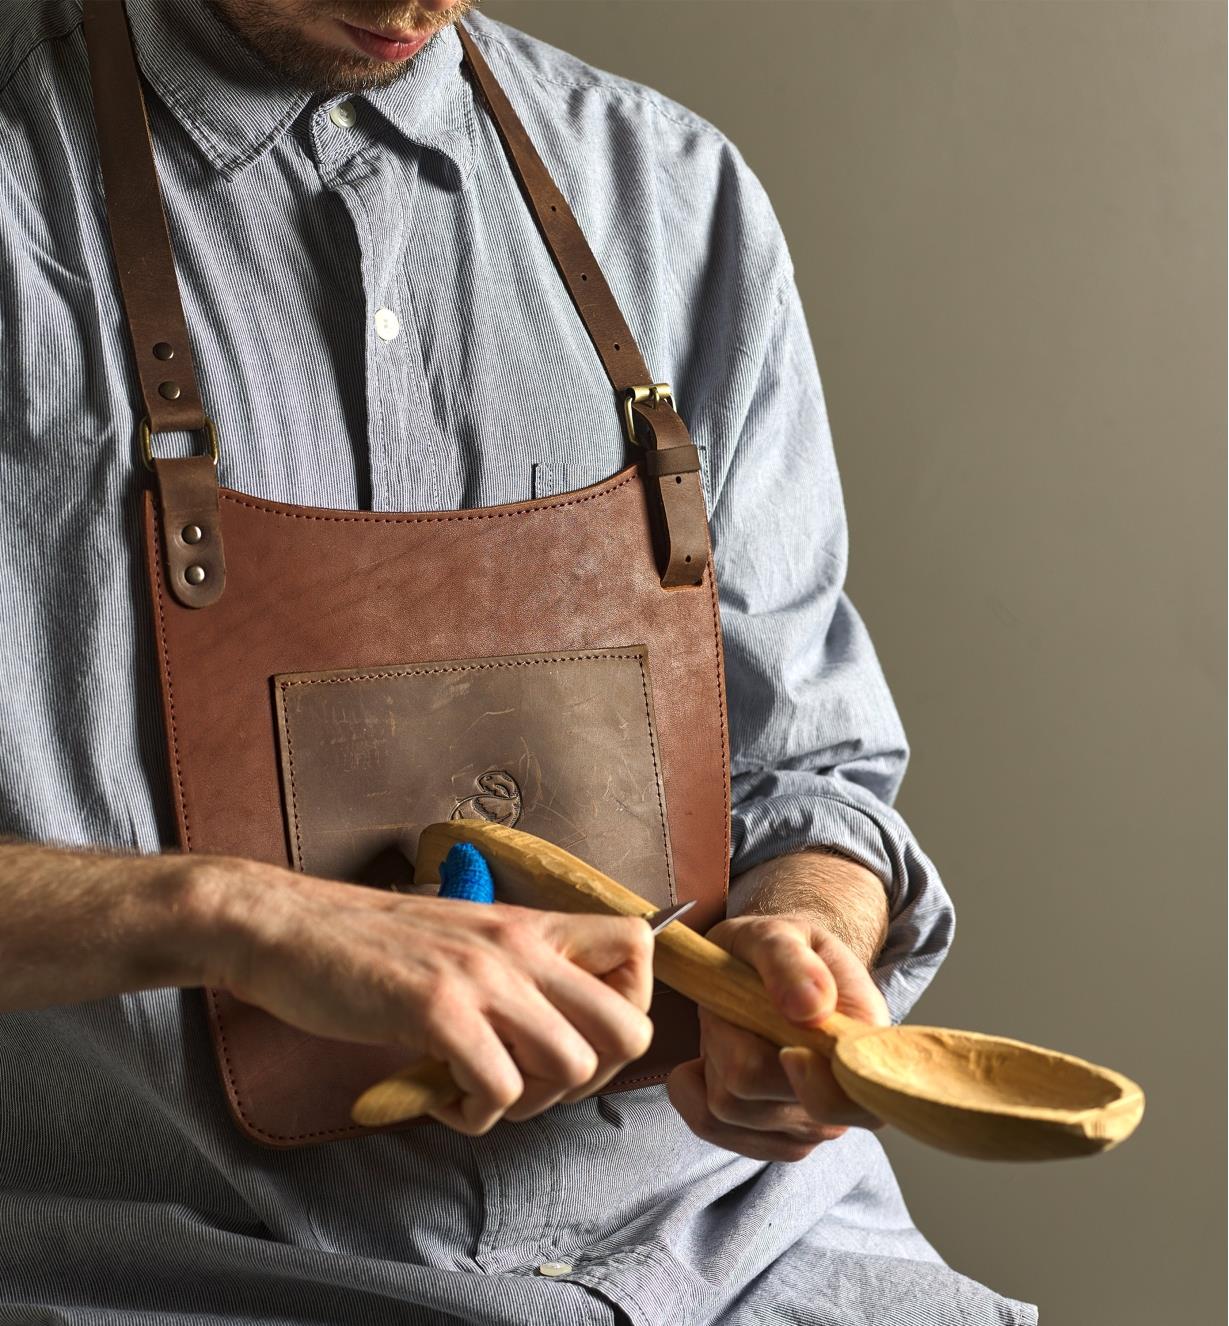 A carver wears a BeaverCraft chest apron while carving a wooden spoon